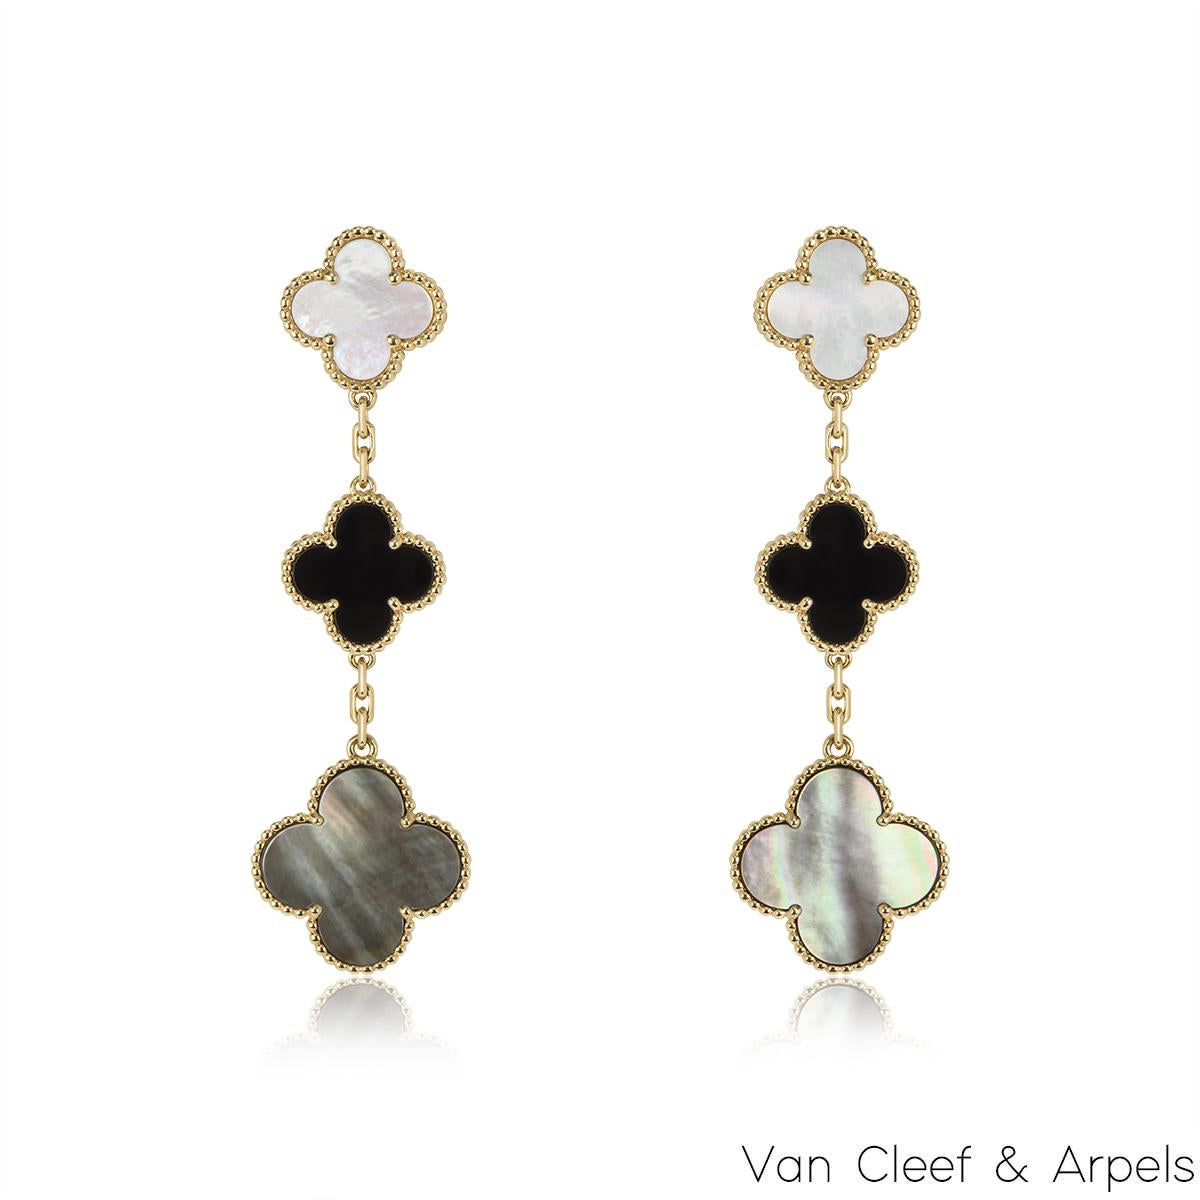 An iconic pair of 18k yellow gold earrings by Van Cleef & Arpels from the Magic Alhambra collection. The earrings comprise of 3 four leaf clover motifs alternating in size complimented by a beaded outer edge each individually set with onyx, grey and